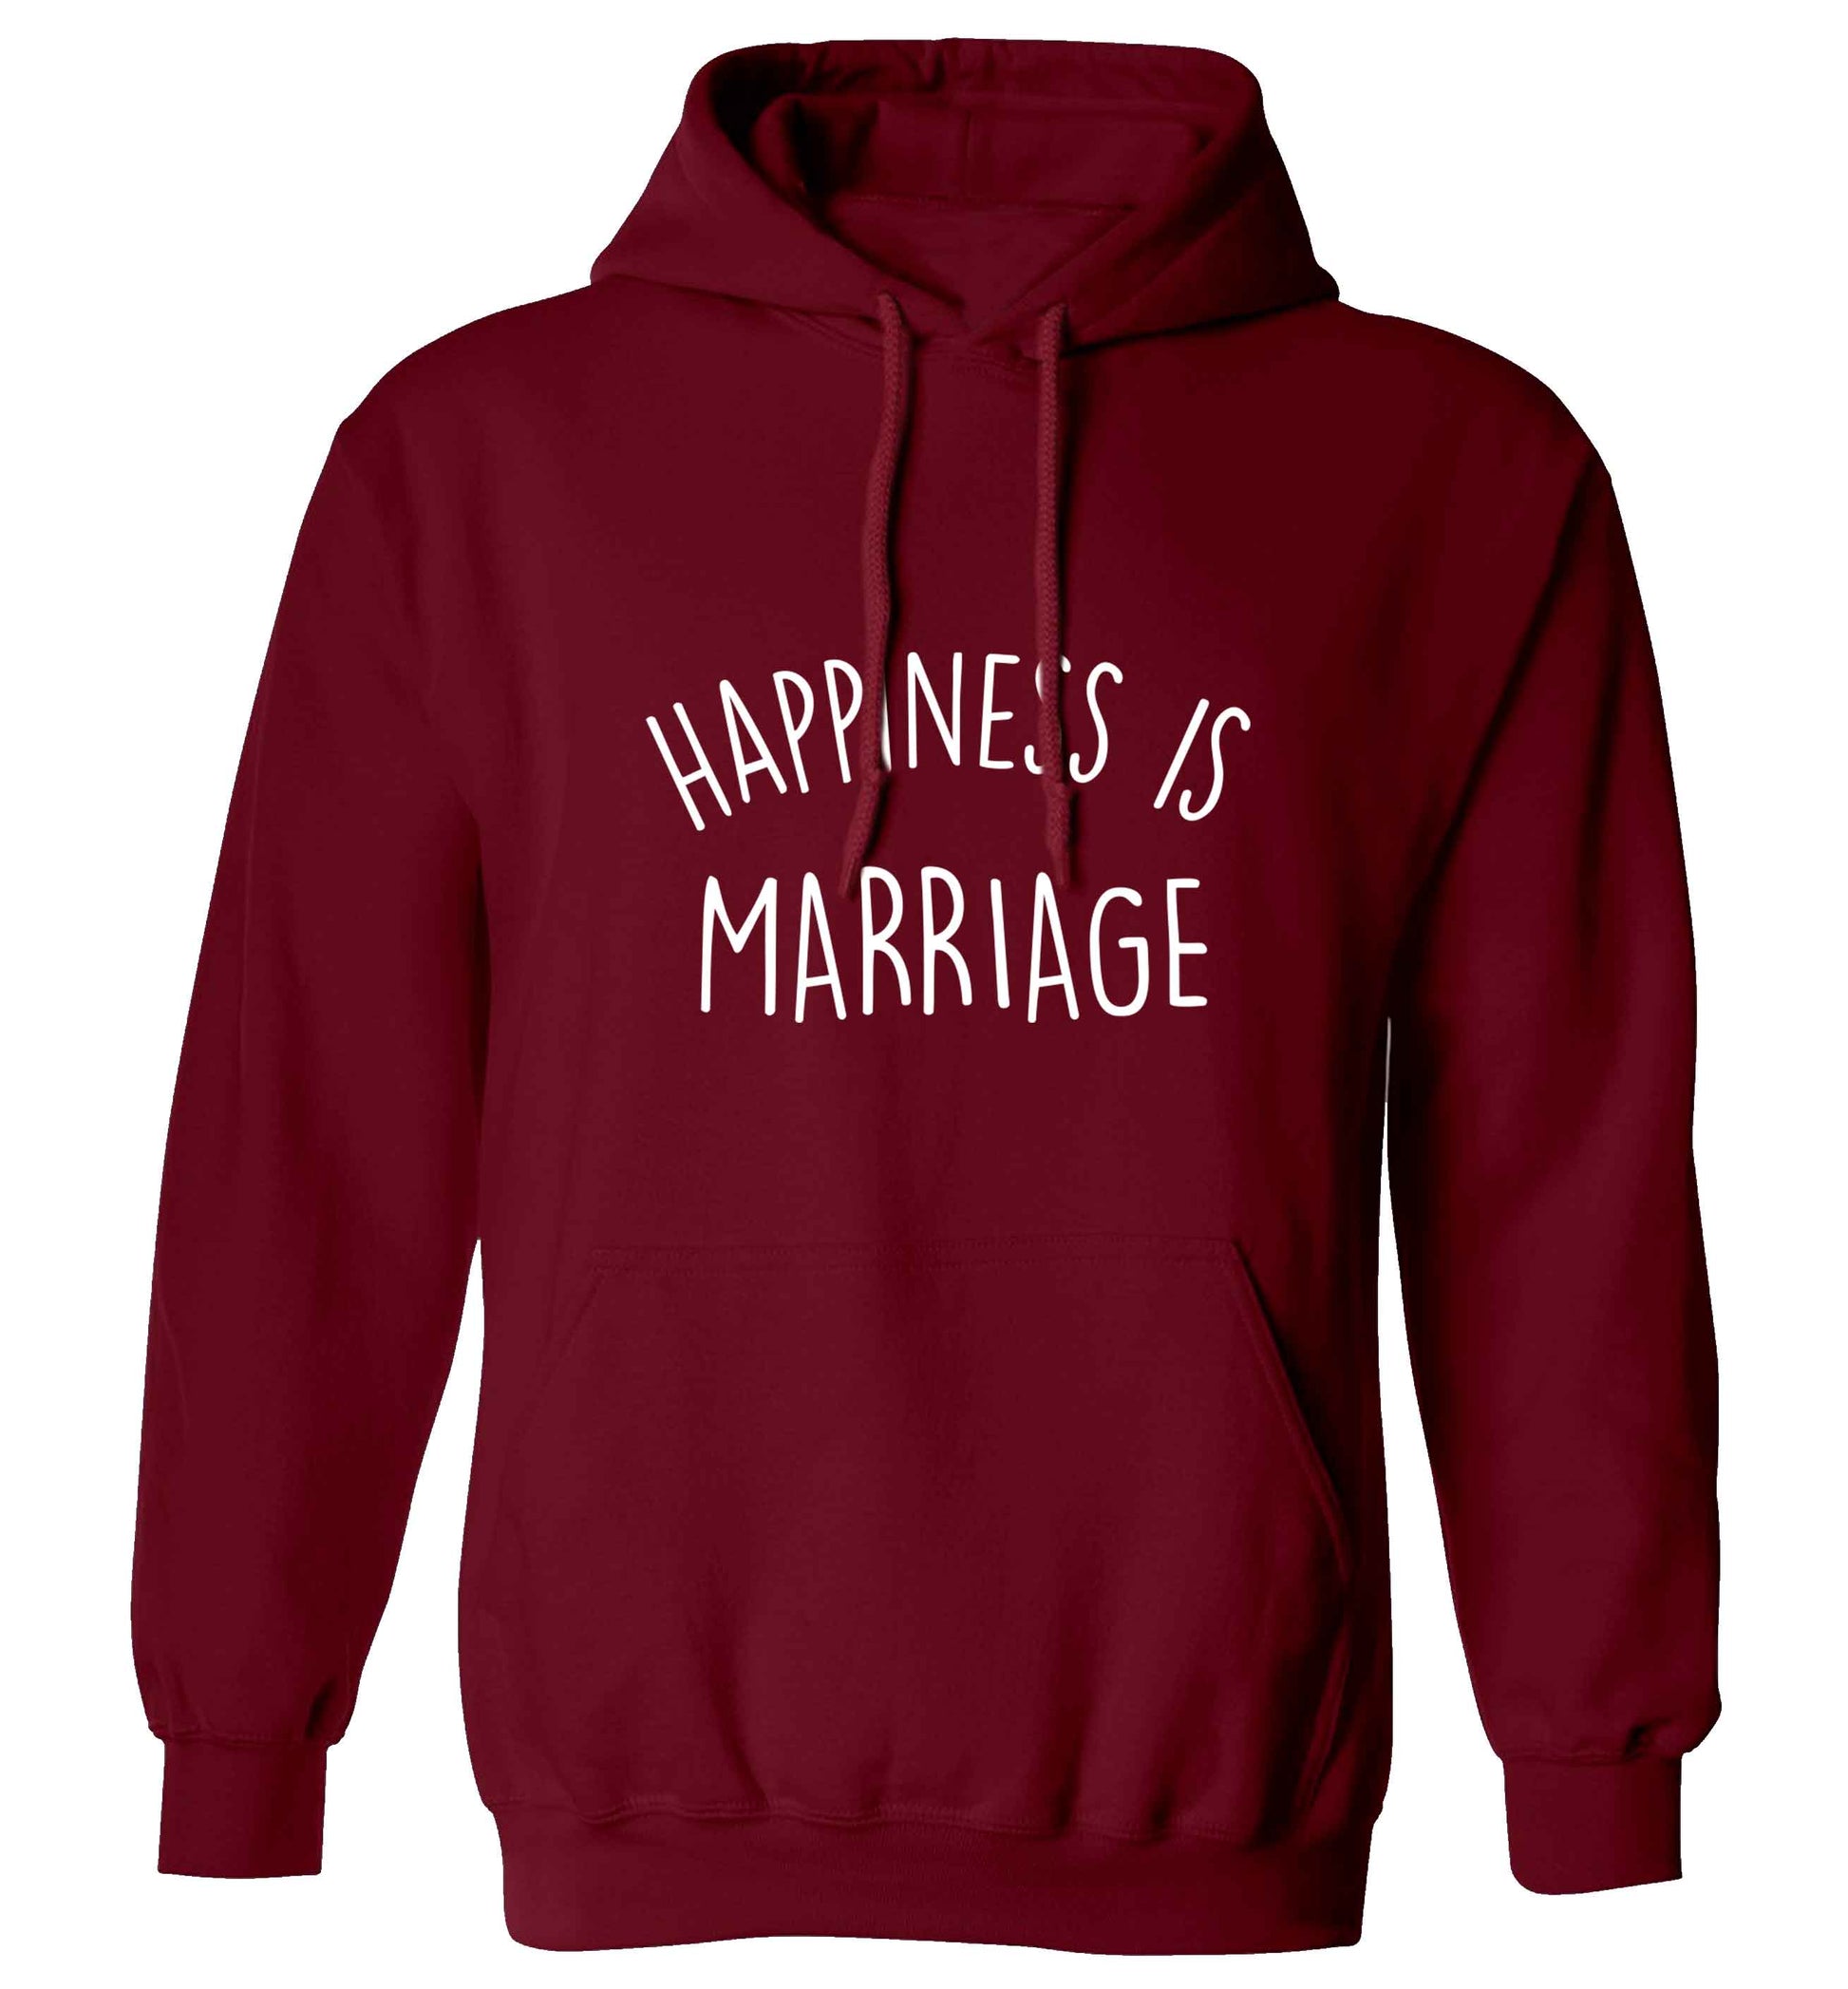 Happiness is marriage adults unisex maroon hoodie 2XL